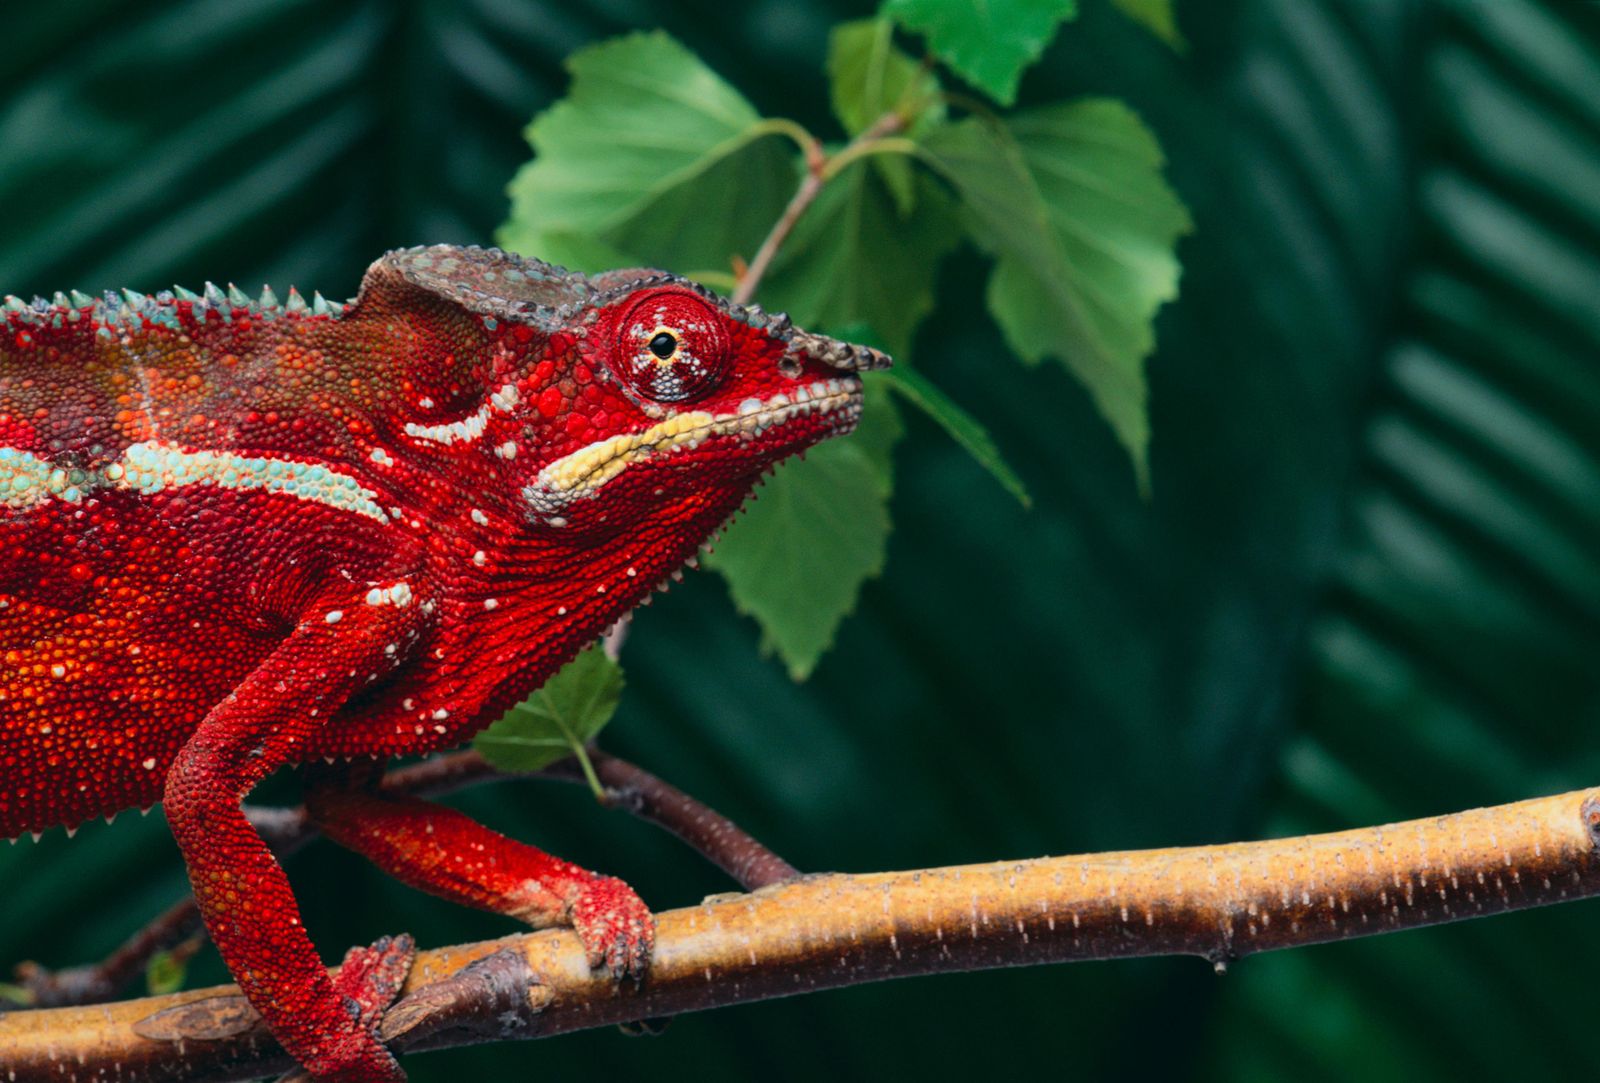 We Finally Know How Chameleons Change Their Color | Smart News| Smithsonian  Magazine